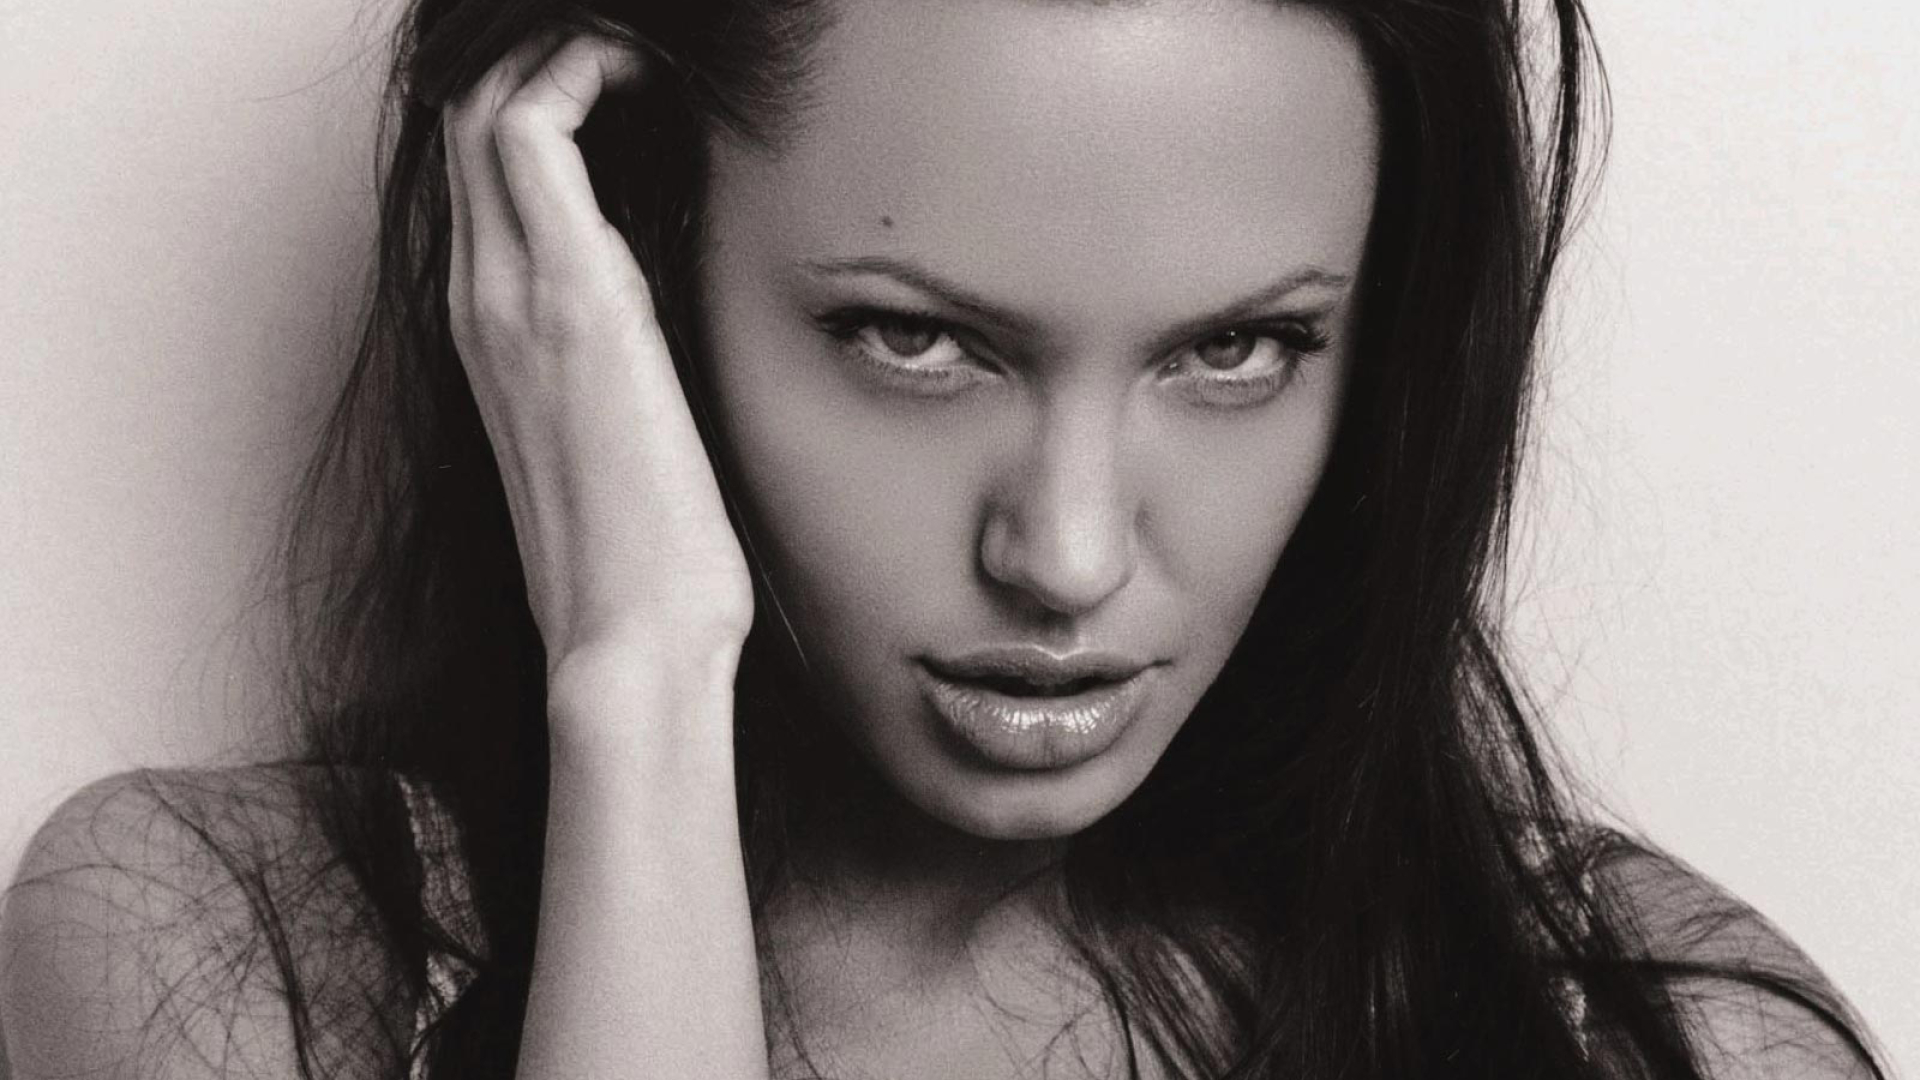 1920x1080 Angelina Jolie Sexy Images 1080p Laptop Full Hd Wallpaper Hd